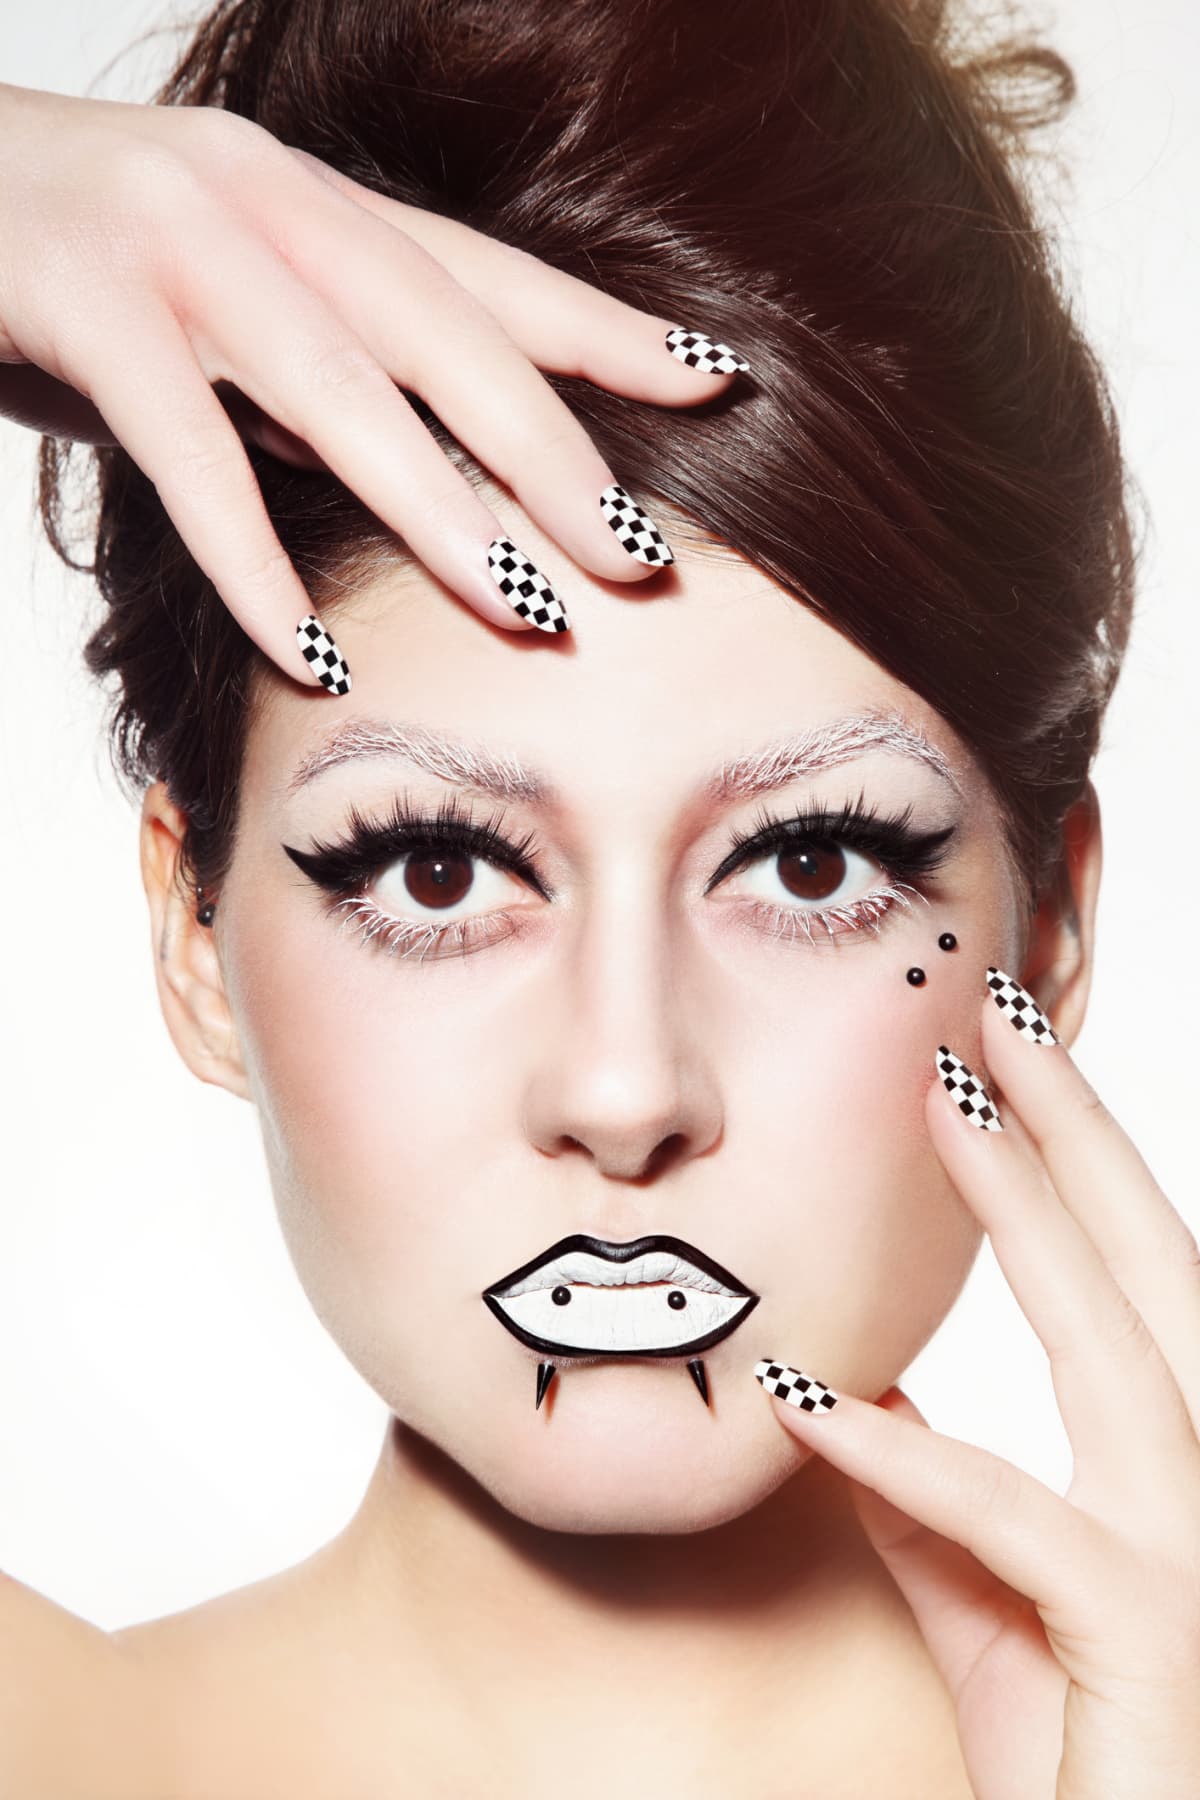 model with checkerboard nails and retro makeup